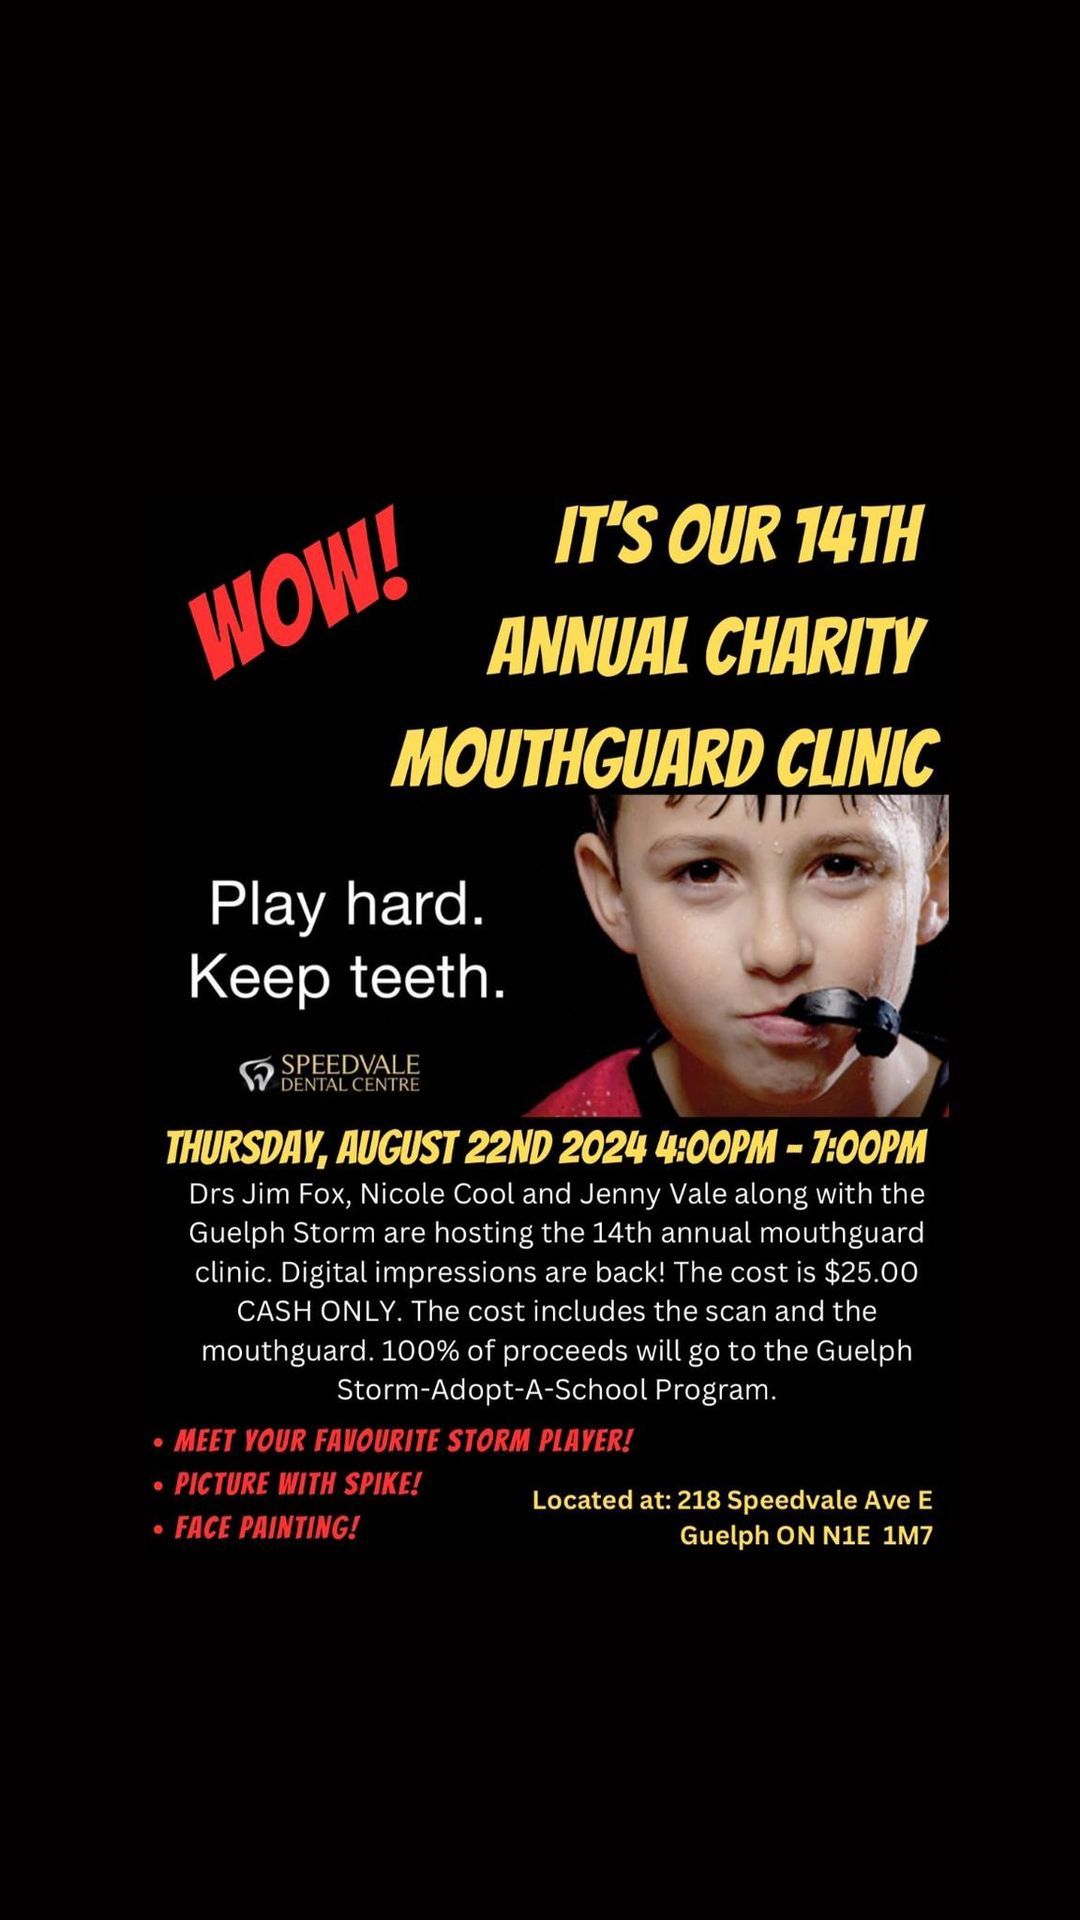 14th Annual Charity Mouthguard Clinic